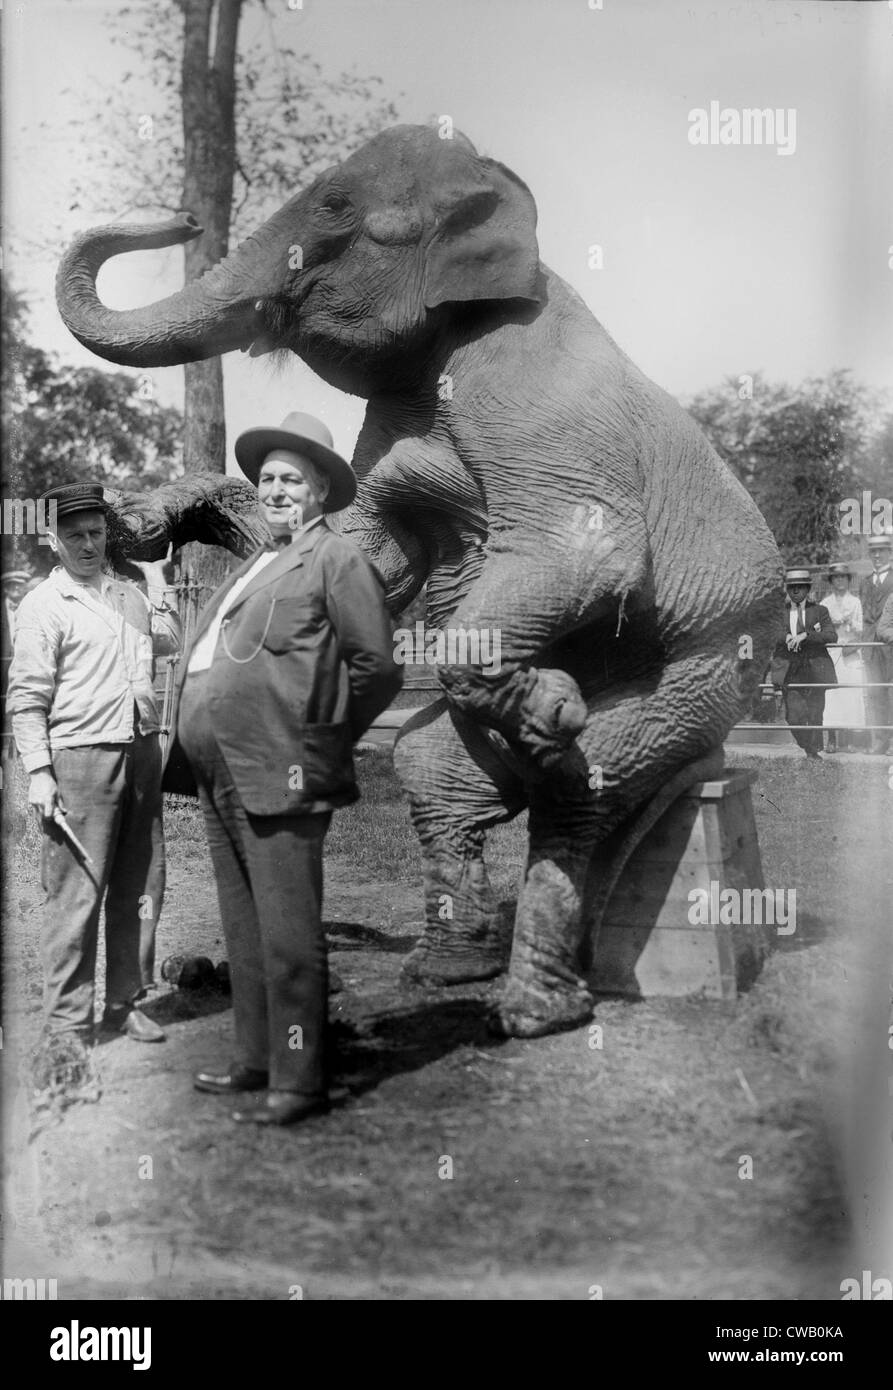 Stewart (right), and elephant, circa early 1900s. Stock Photo